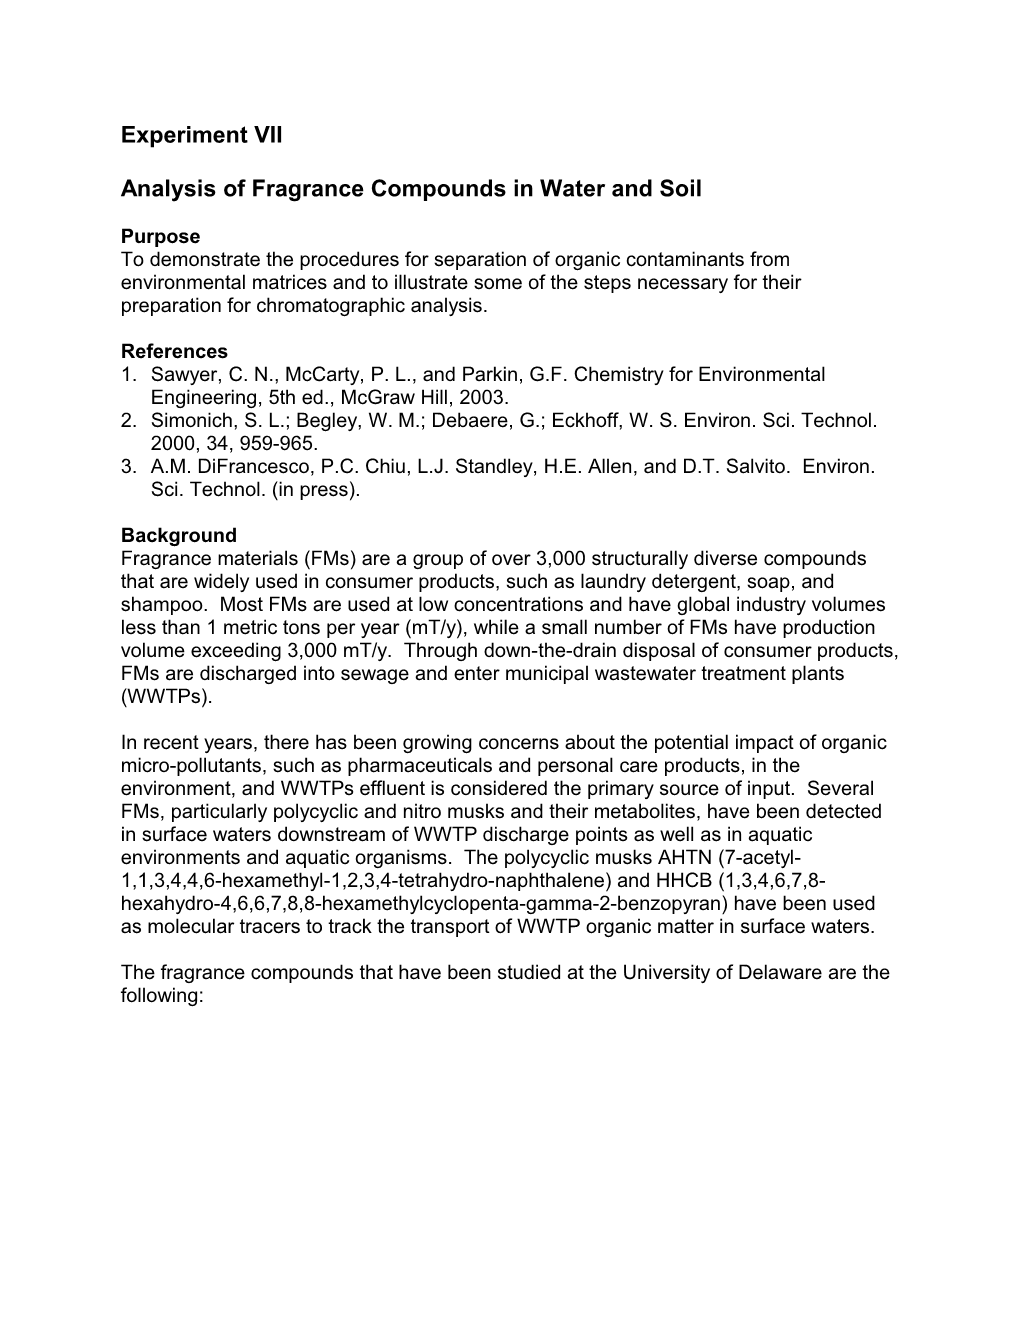 Analysis of Fragrance Compounds in Water and Soil